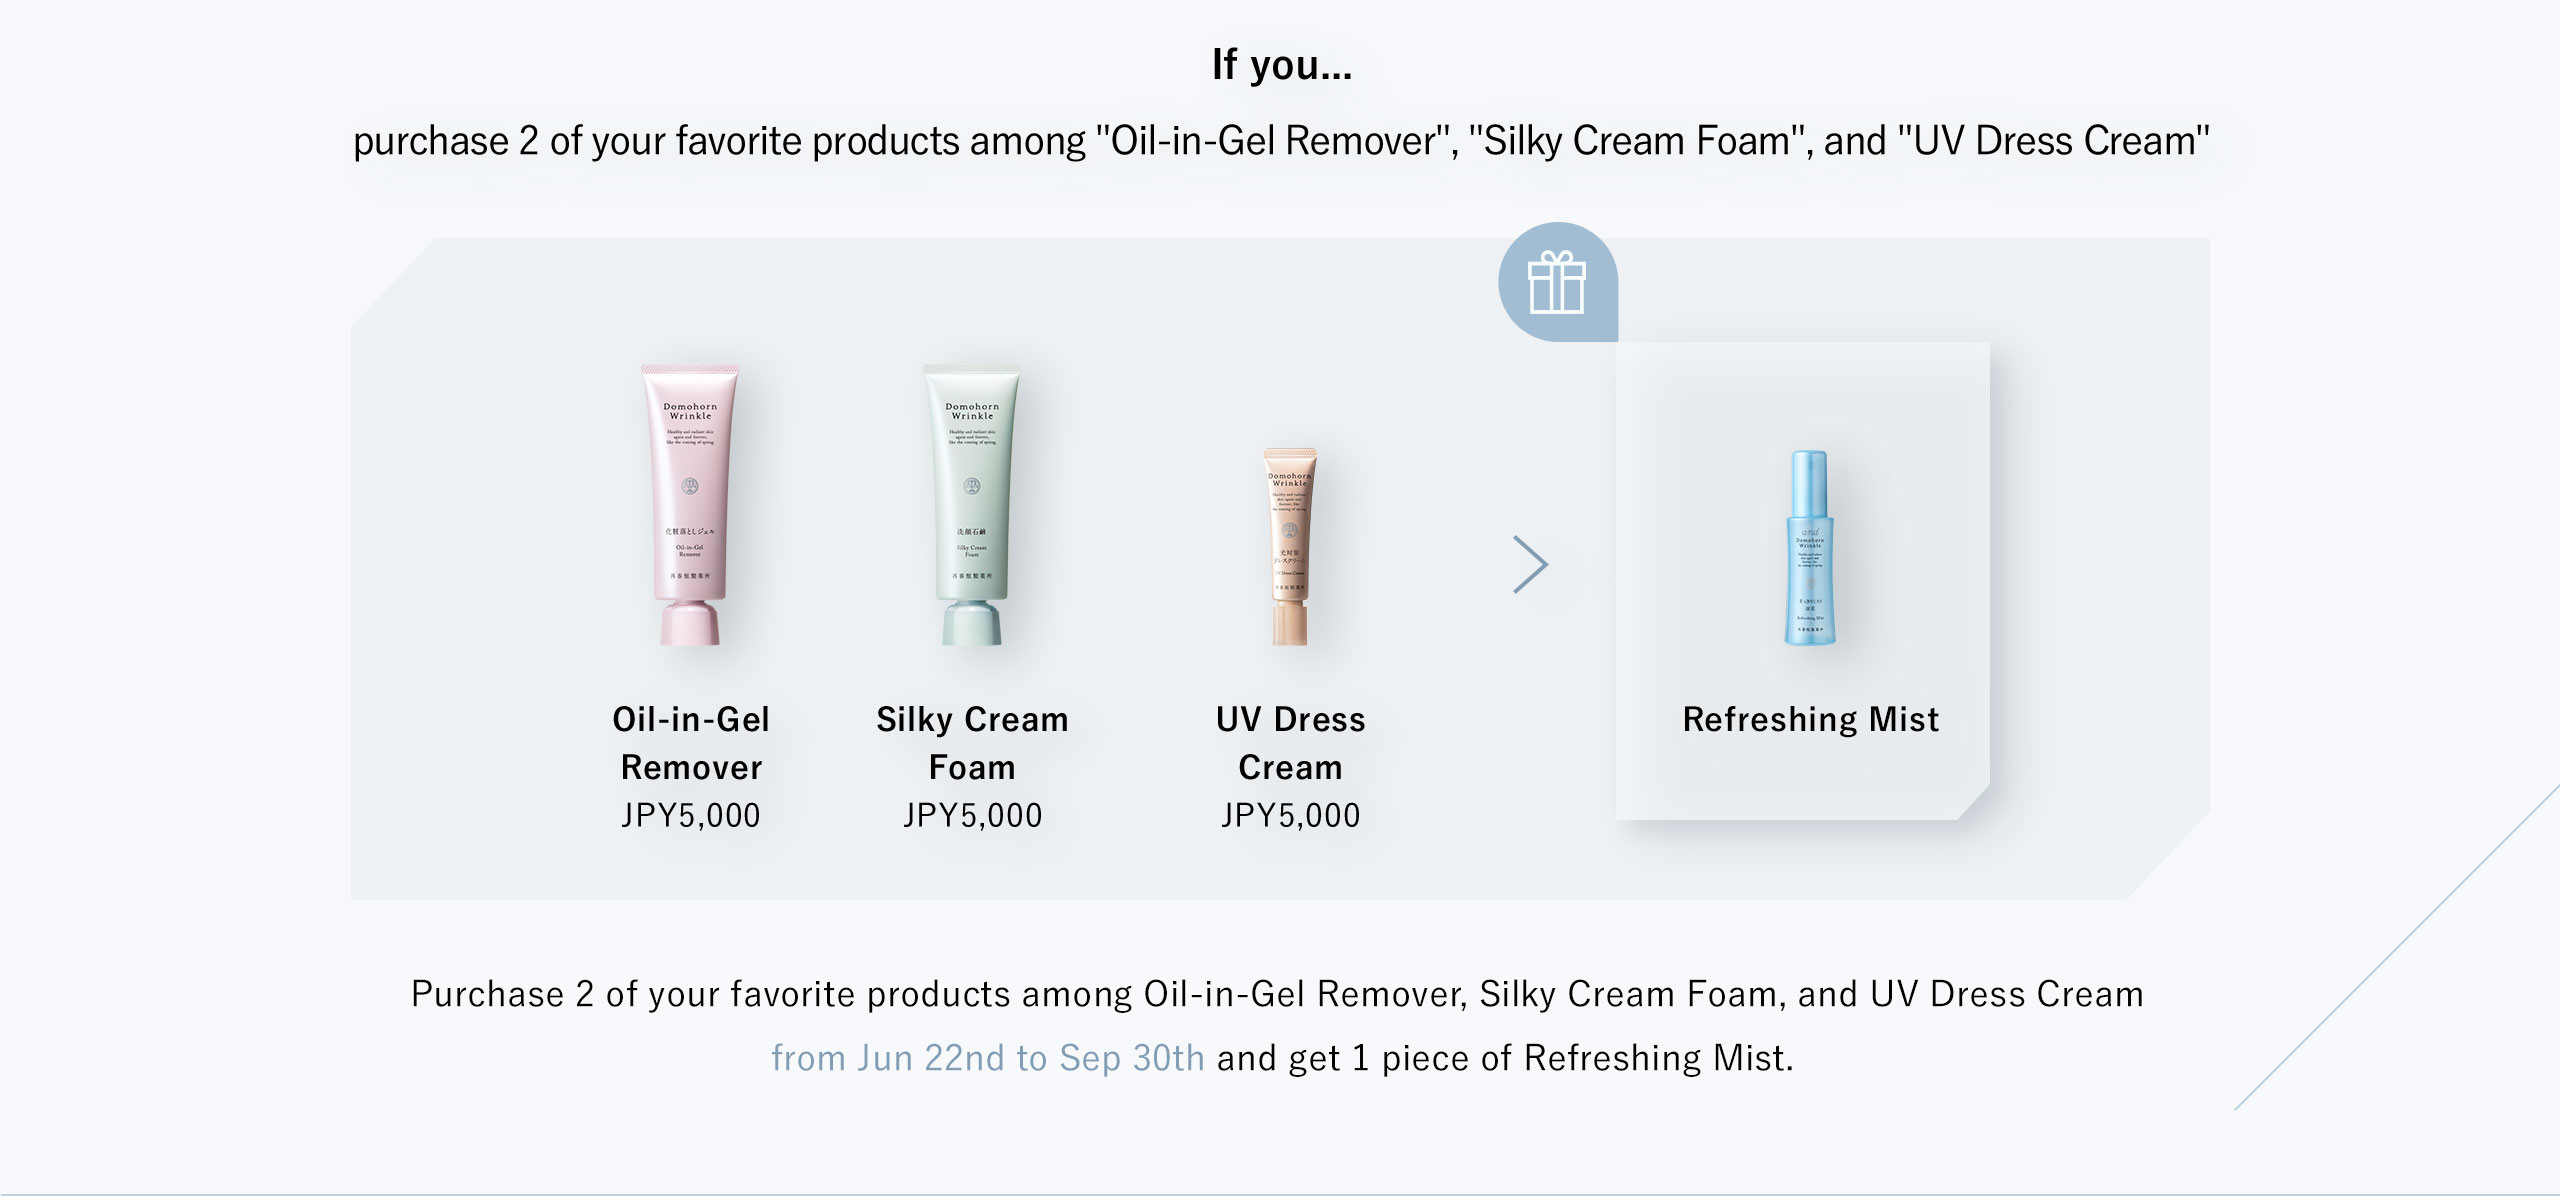 If you... purchase 2 of your favorite products among "Oil-in-Gel Remover", "Silky Cream Foam", and "UV Dress Cream". You get Refreshing Mist. Purchase 2 of your favorite products among Oil-in-Gel Remover, Silky Cream Foam, and UV Dress Cream from Jun 22nd to Sep 30th and get 1 piece of Refreshing Mist.